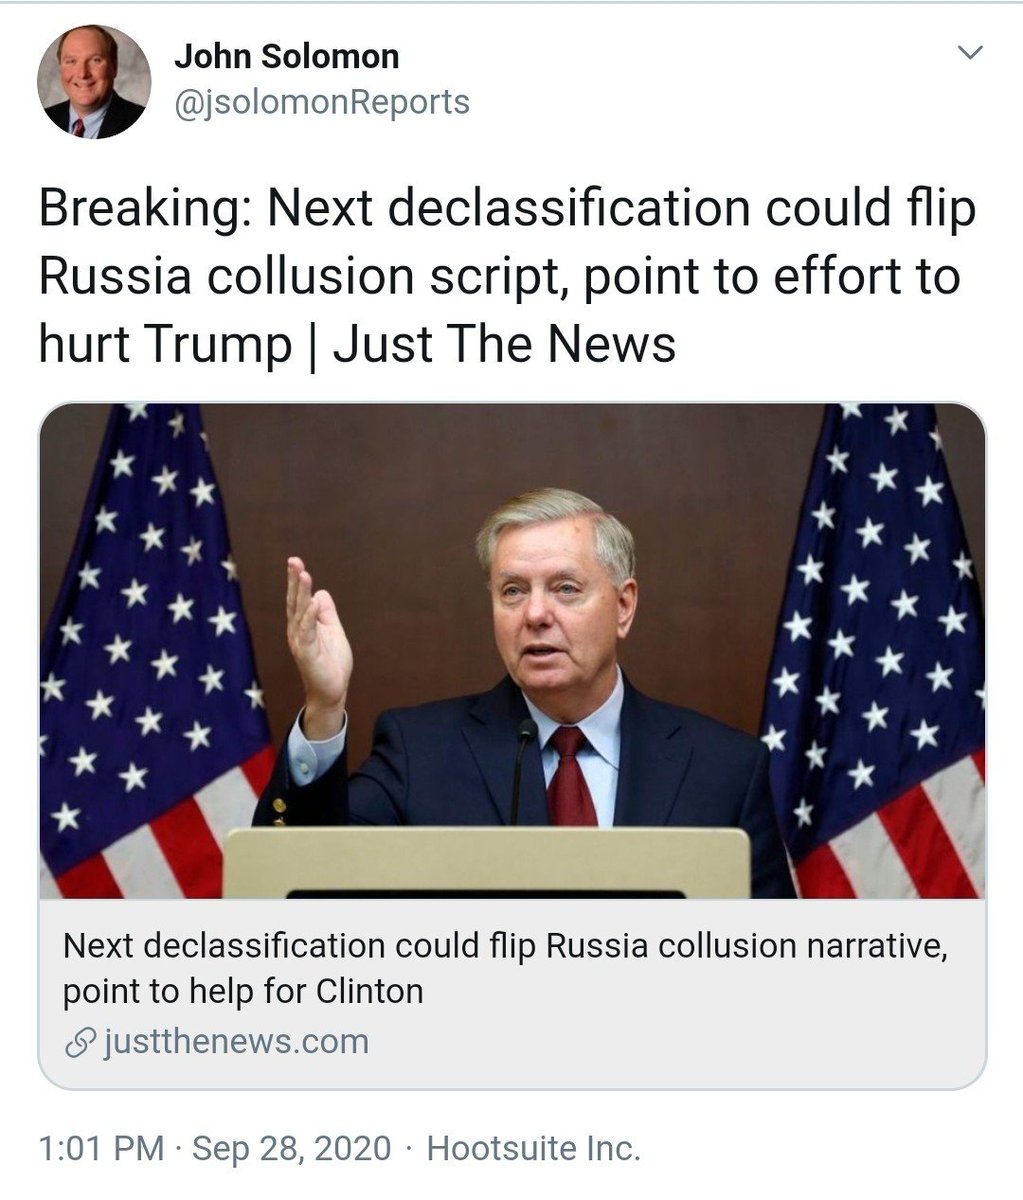 3. JS says next DECLAS'll "flip script" - Putin NOT trying to help Trump - just the opposite. https://twitter.com/jsolomonReports/status/1310625667923443717"Brennan.. excluded credible intel that Russia wanted Hill" https://justthenews.com/accountability/russia-and-ukraine-scandals/next-declassification-could-flip-russia-collusion https://www.justice.gov/archives/jm/criminal-resource-manual-910-knowingly-and-willfully https://www.justice.gov/archives/jm/criminal-resource-manual-923-18-usc-371-conspiracy-defraud-us https://uscode.house.gov/view.xhtml?path=/prelim@title18/part1/chapter115&edition=prelim